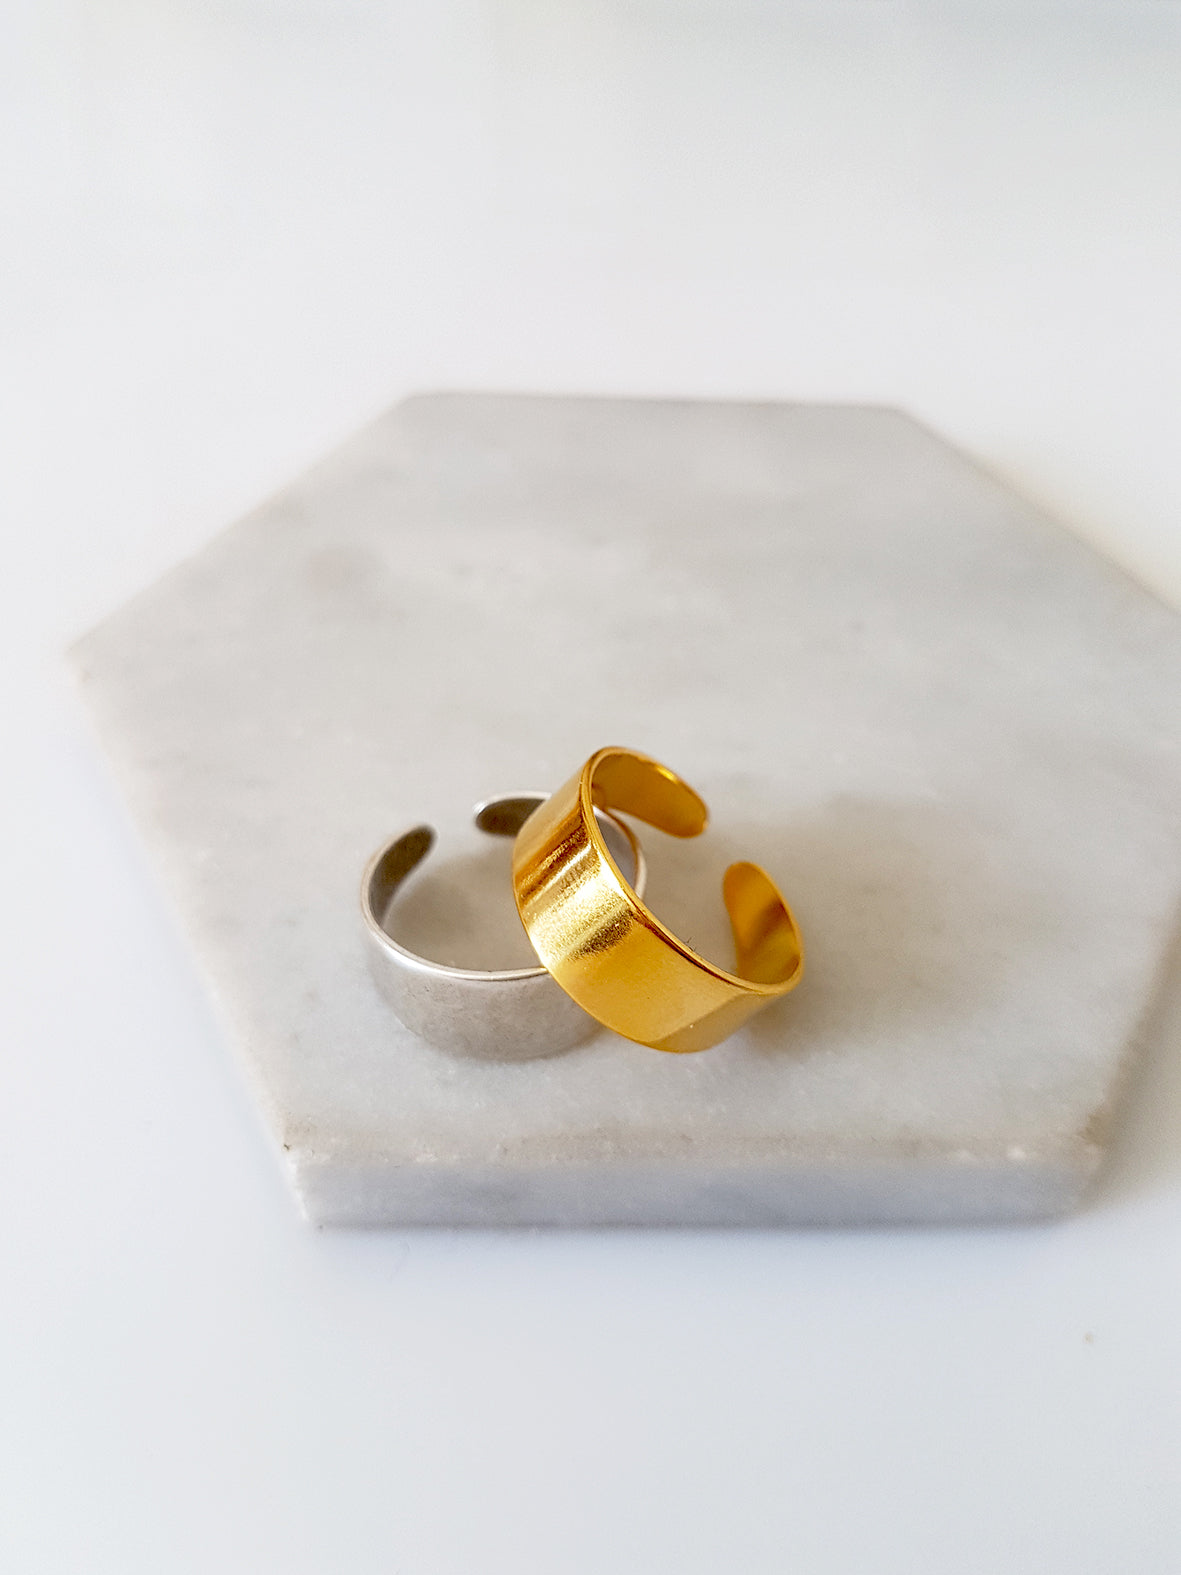 Minimal ring in a package of 1 piece - SoCuteb2b